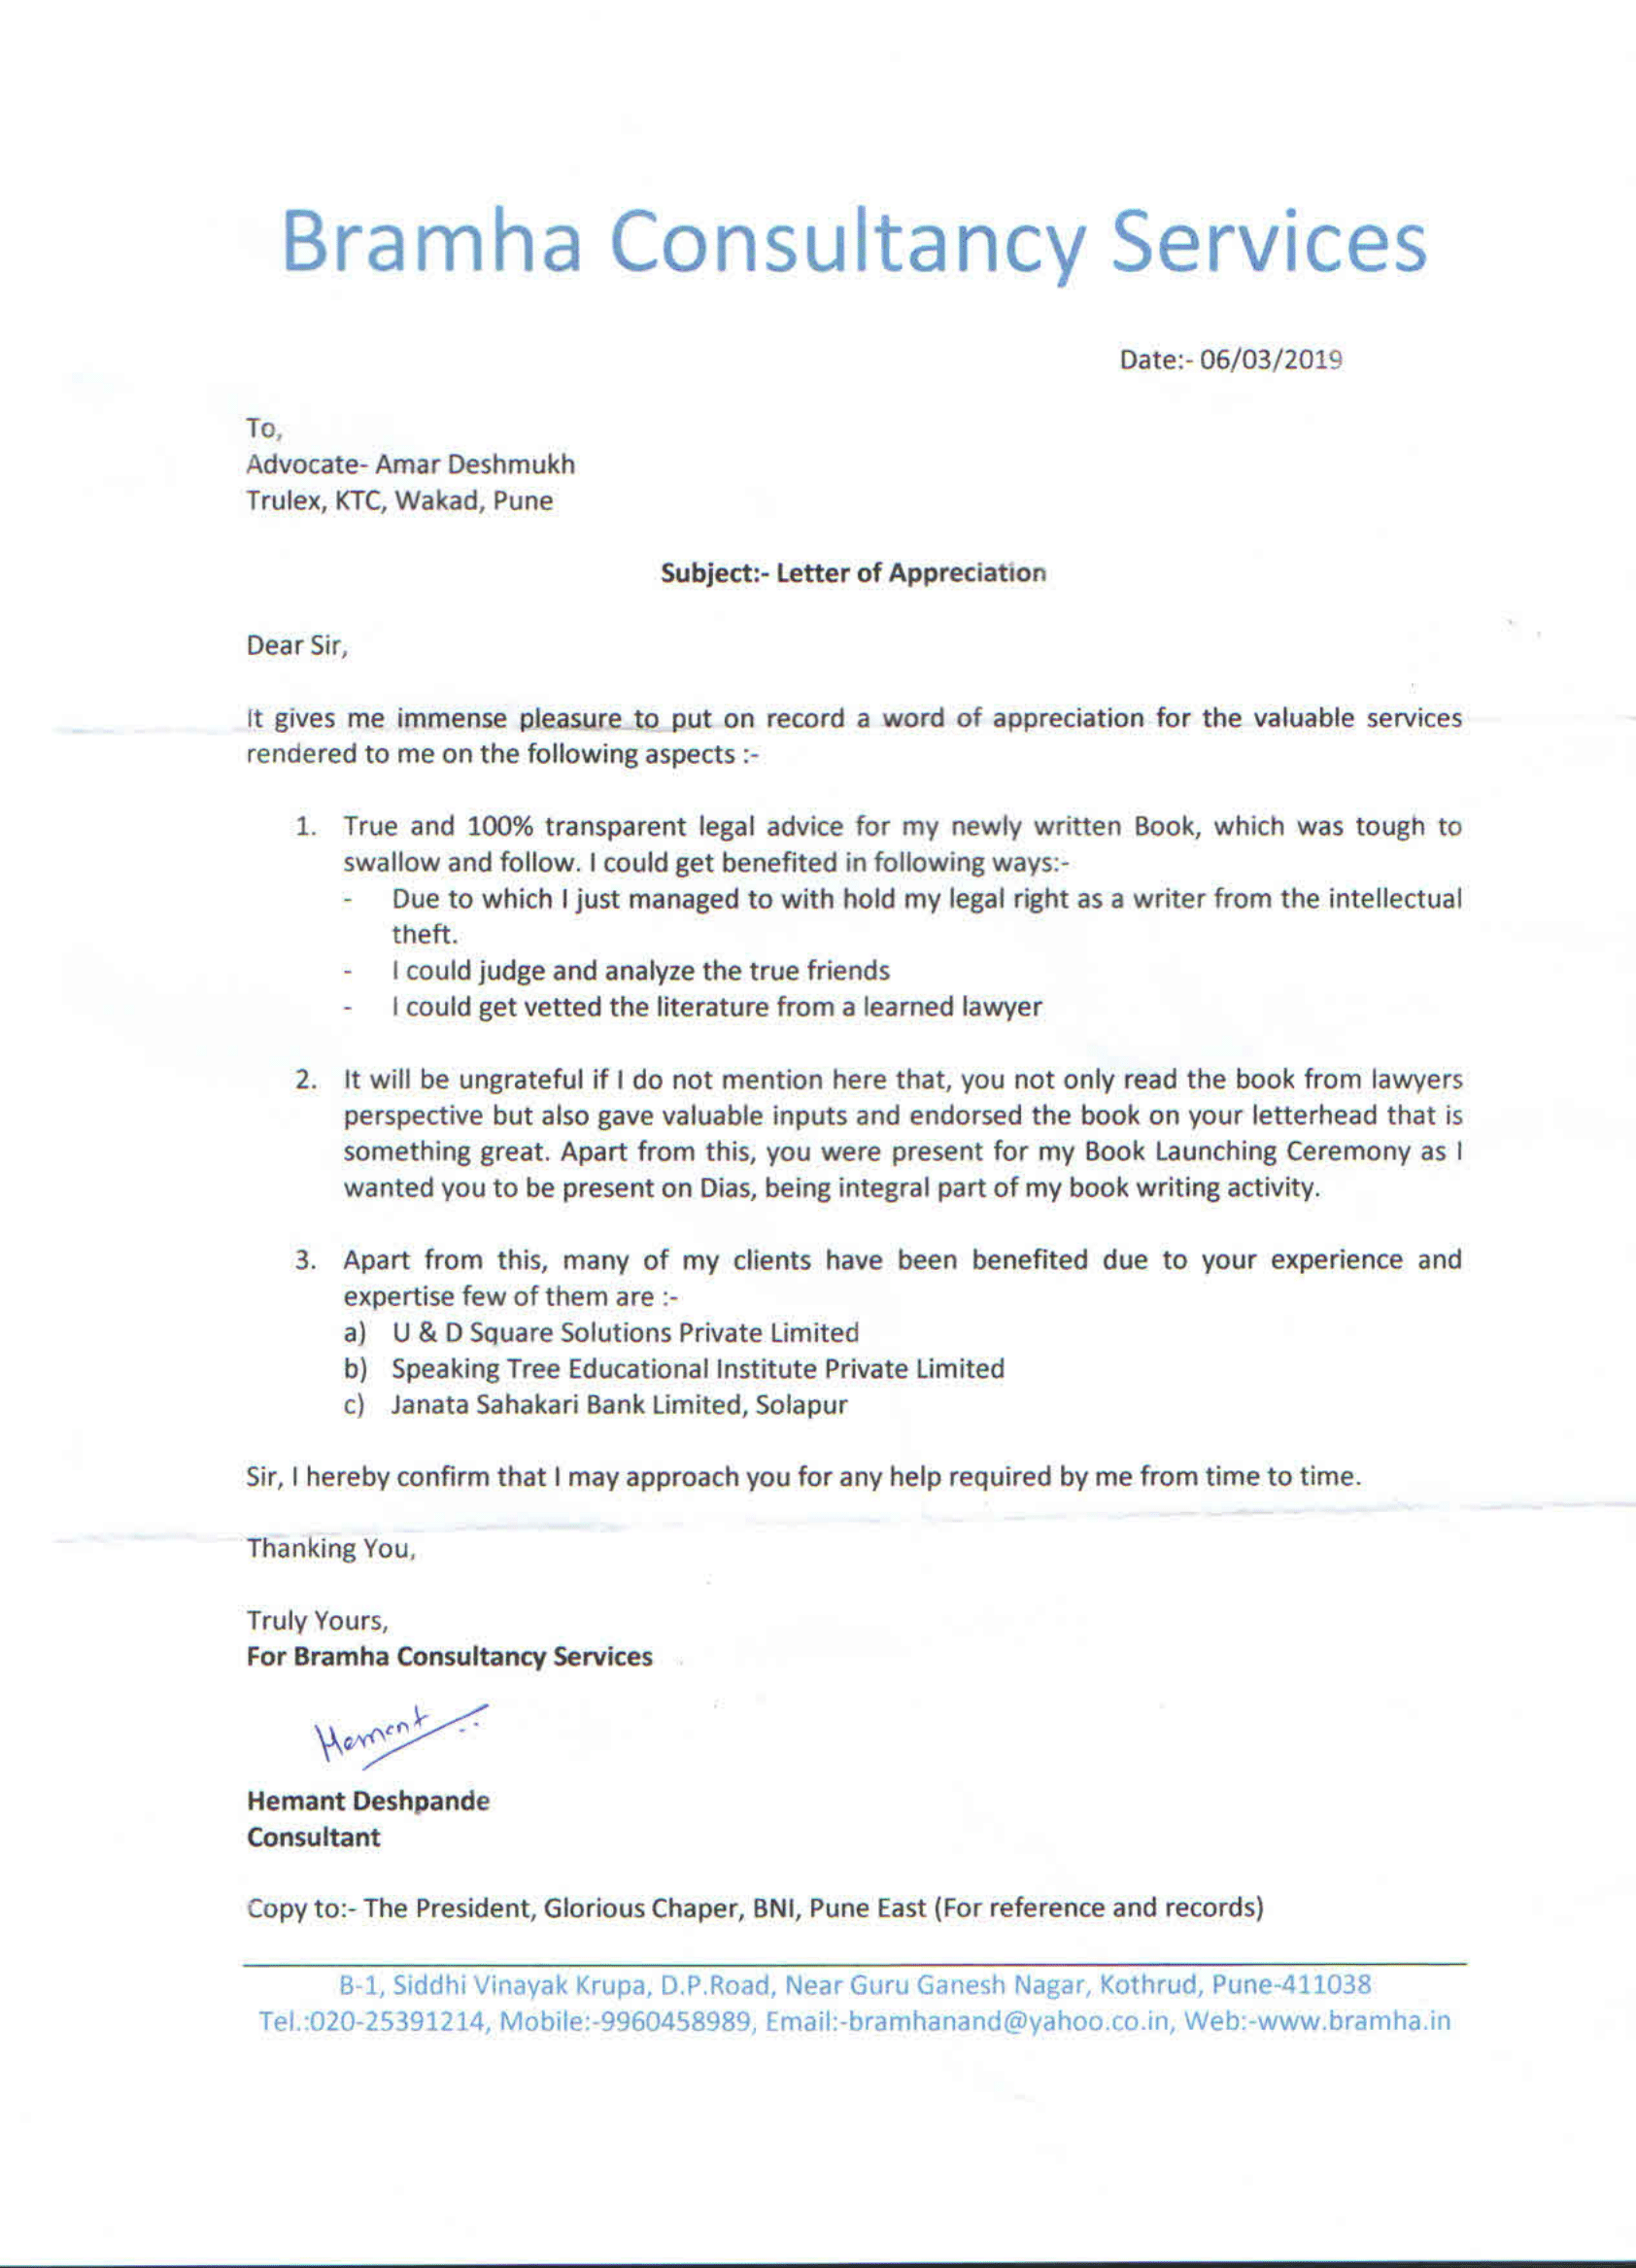 Letter of appreciation from Bramha Consultancy Services